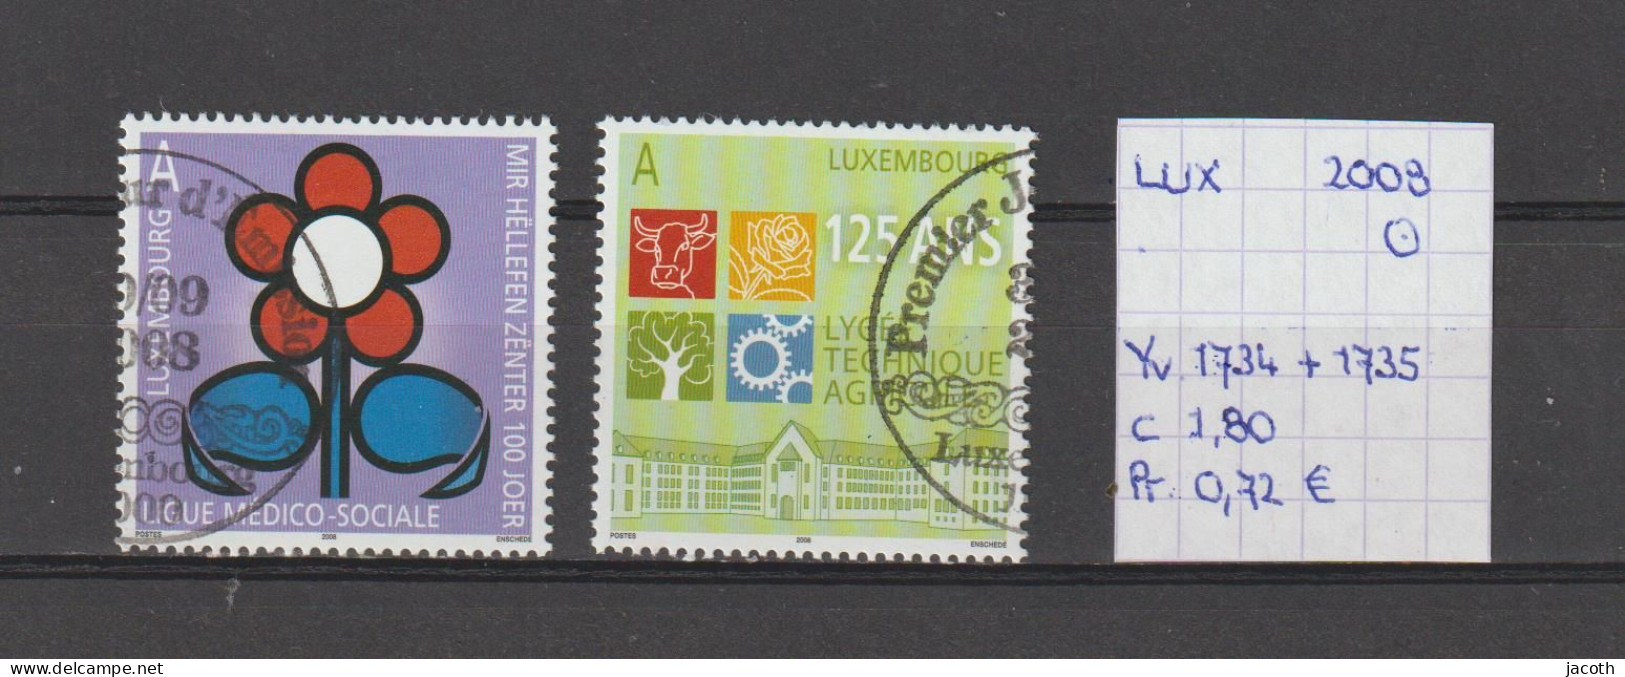 (TJ) Luxembourg 2008 - YT 1734 + 1735 (gest./obl./used) - Gebraucht